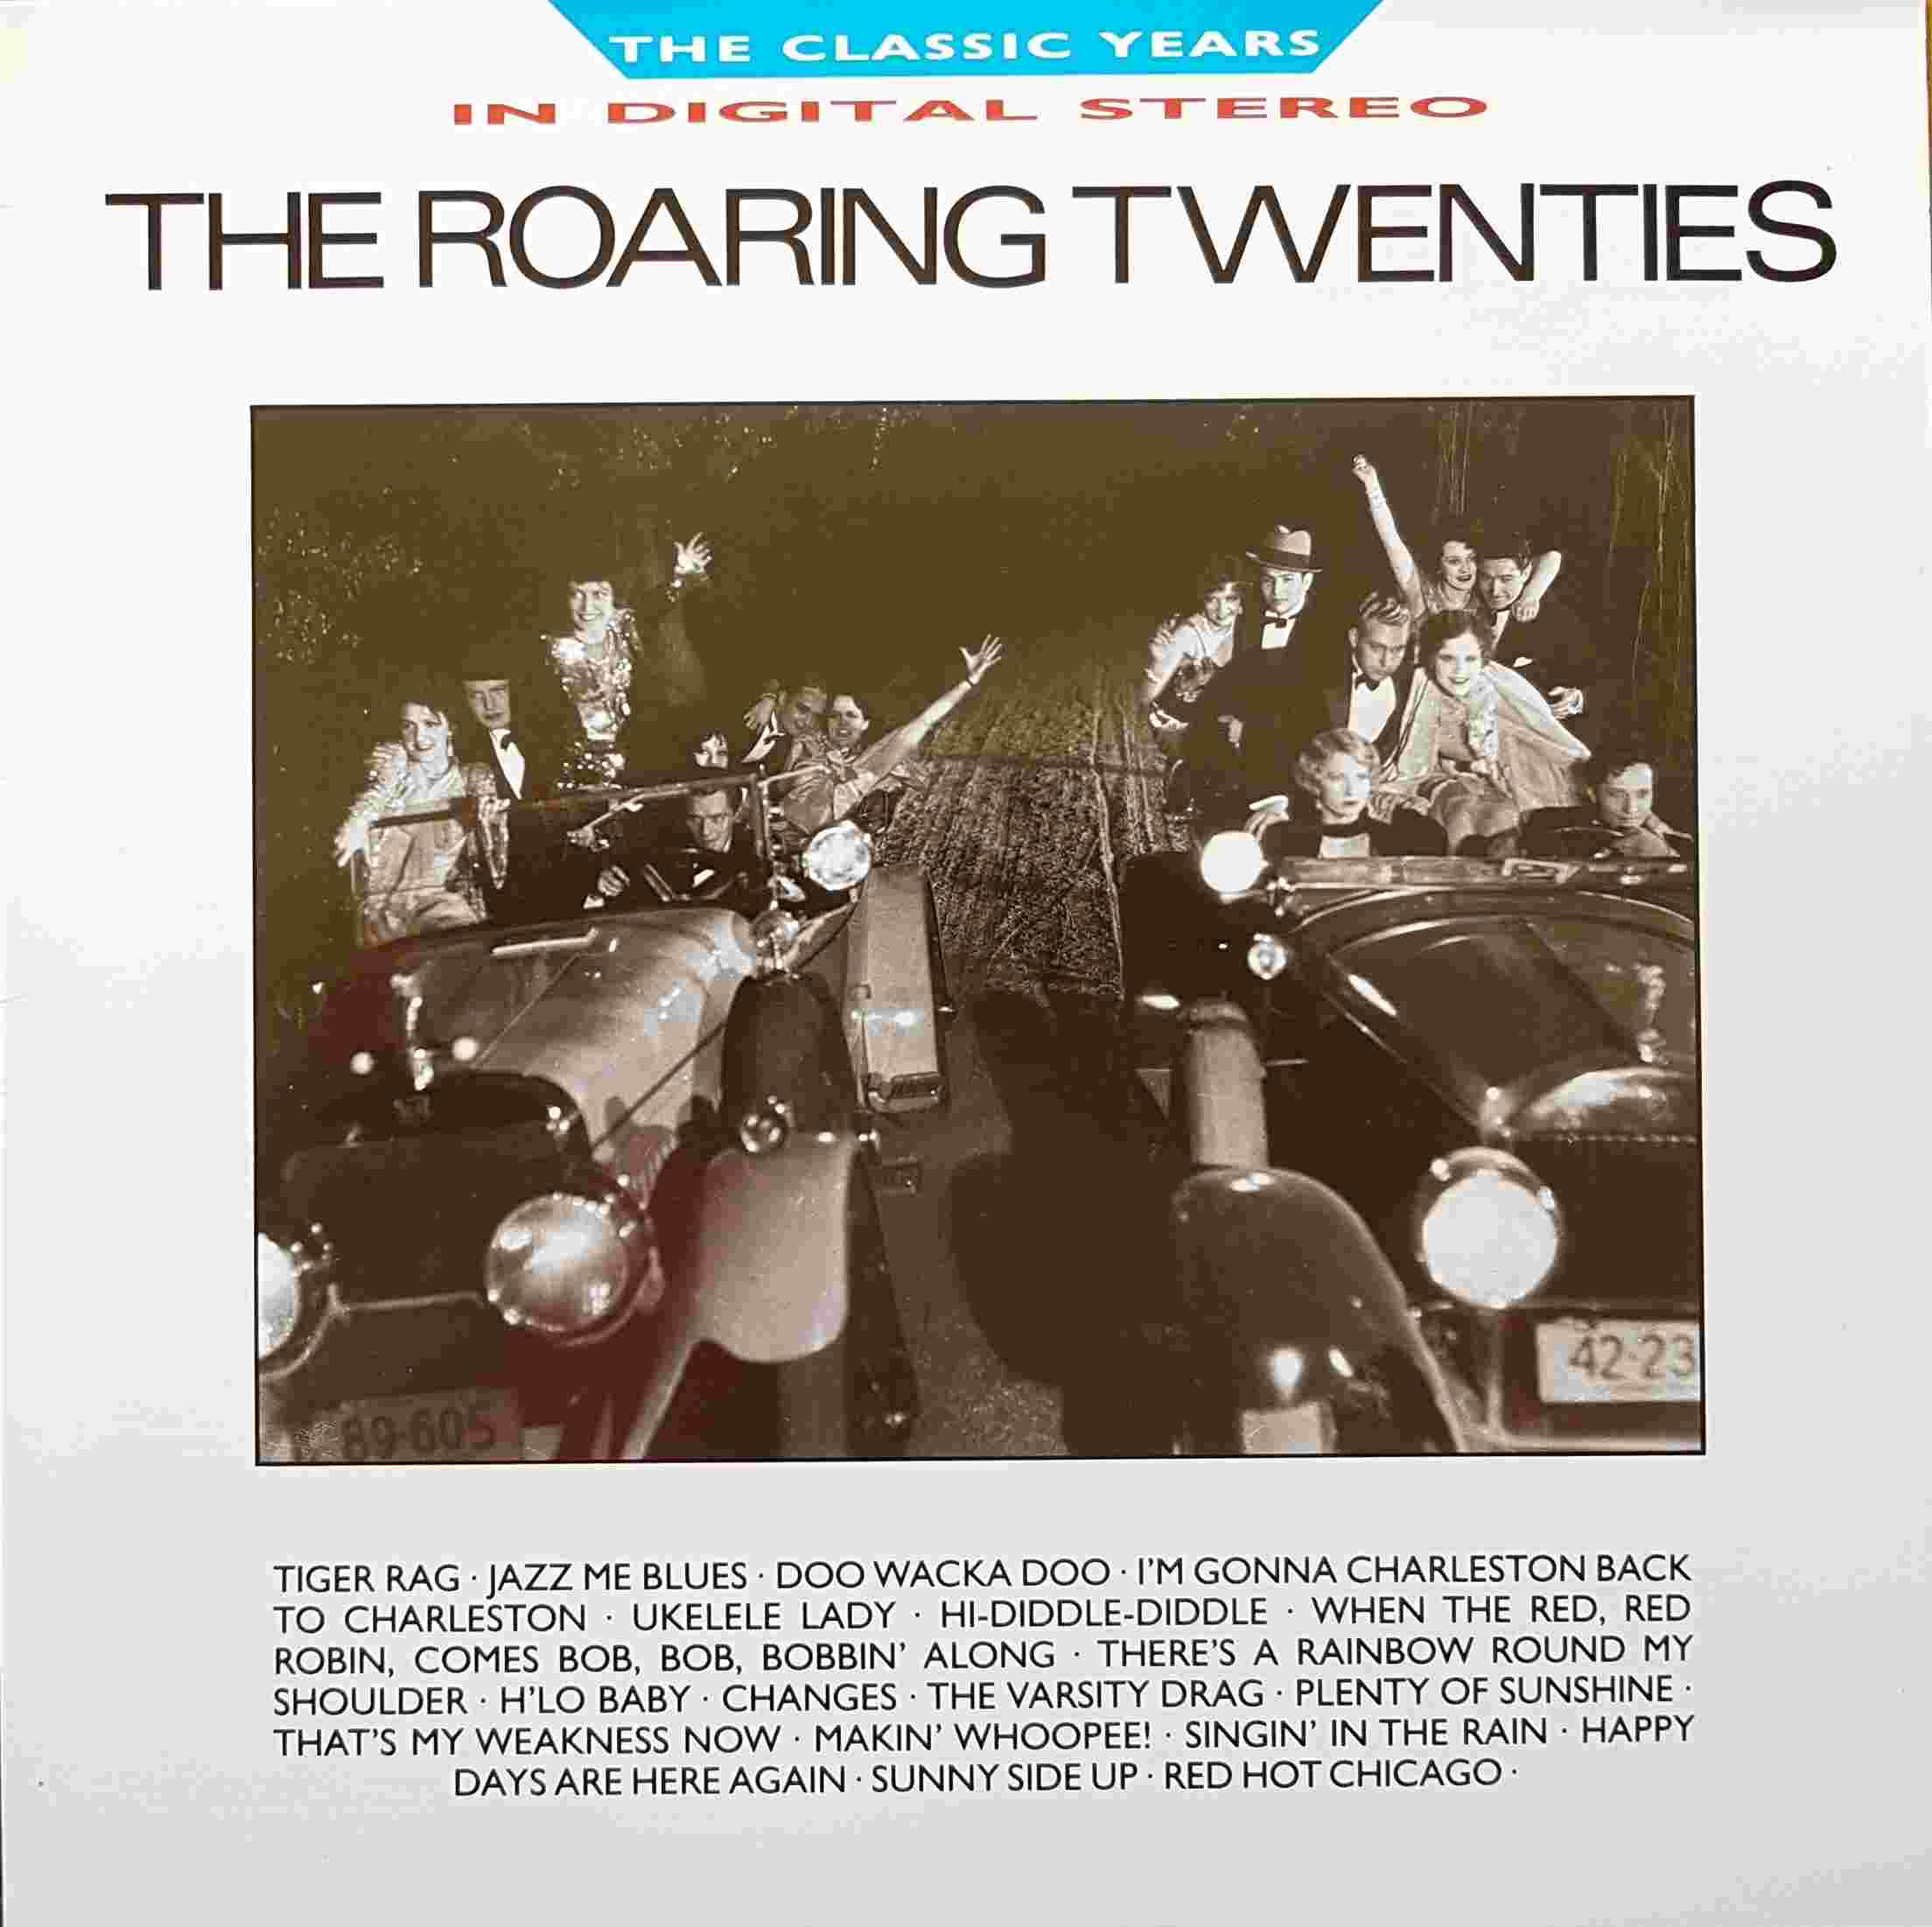 Picture of REB 704 Classic years - The roaring twenties by artist Various from the BBC albums - Records and Tapes library